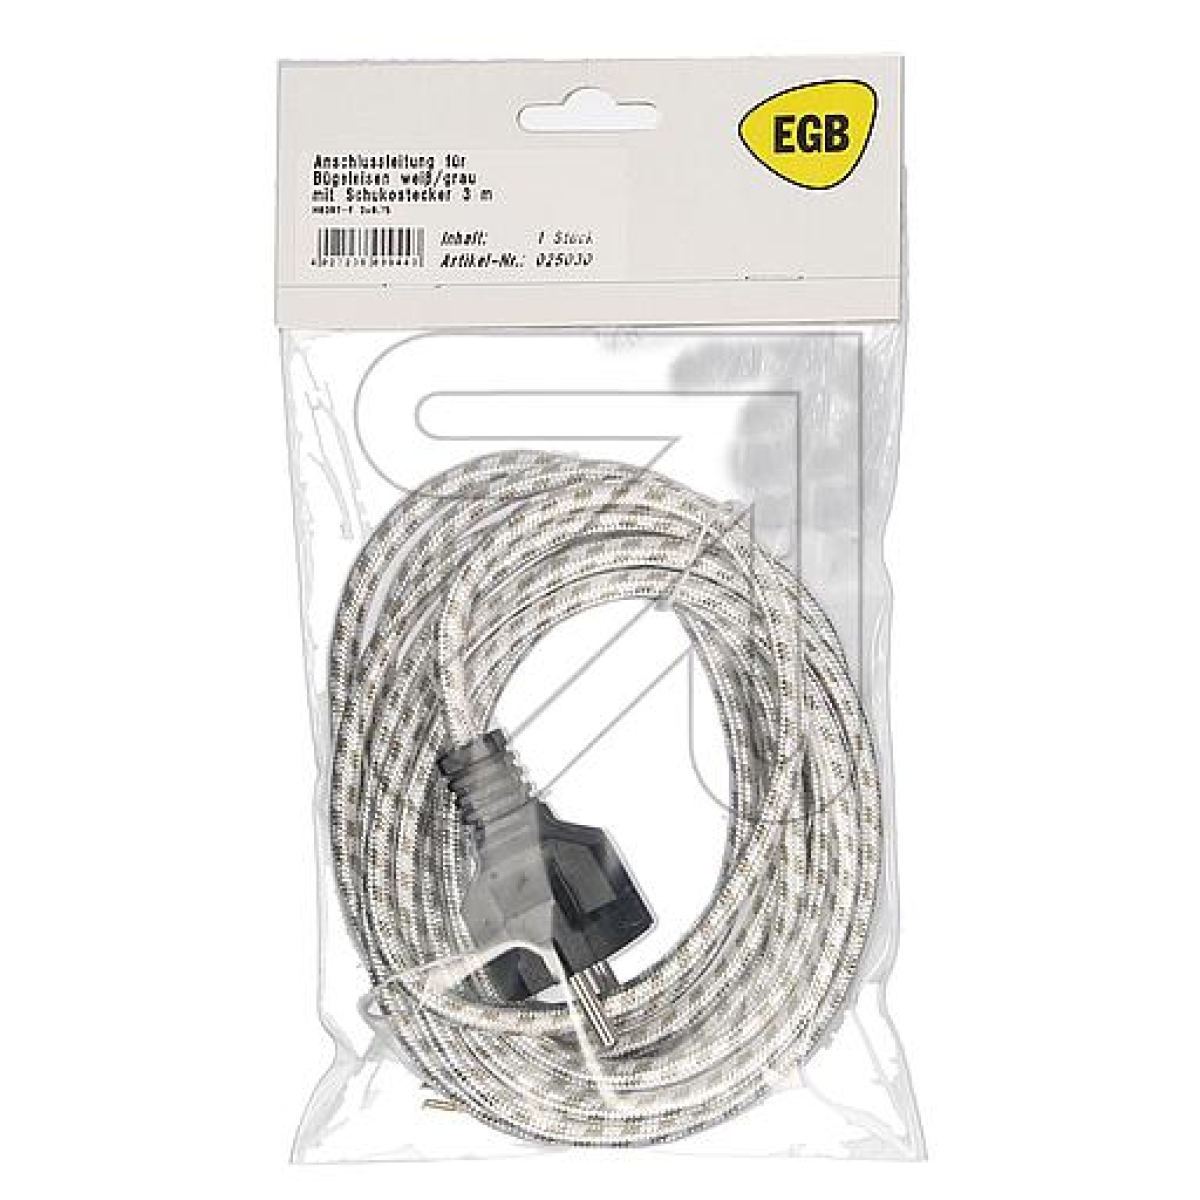 EGBSB iron connection cable 3.0m white/grey H03RT-F3x0.75mm²Article-No: 025030